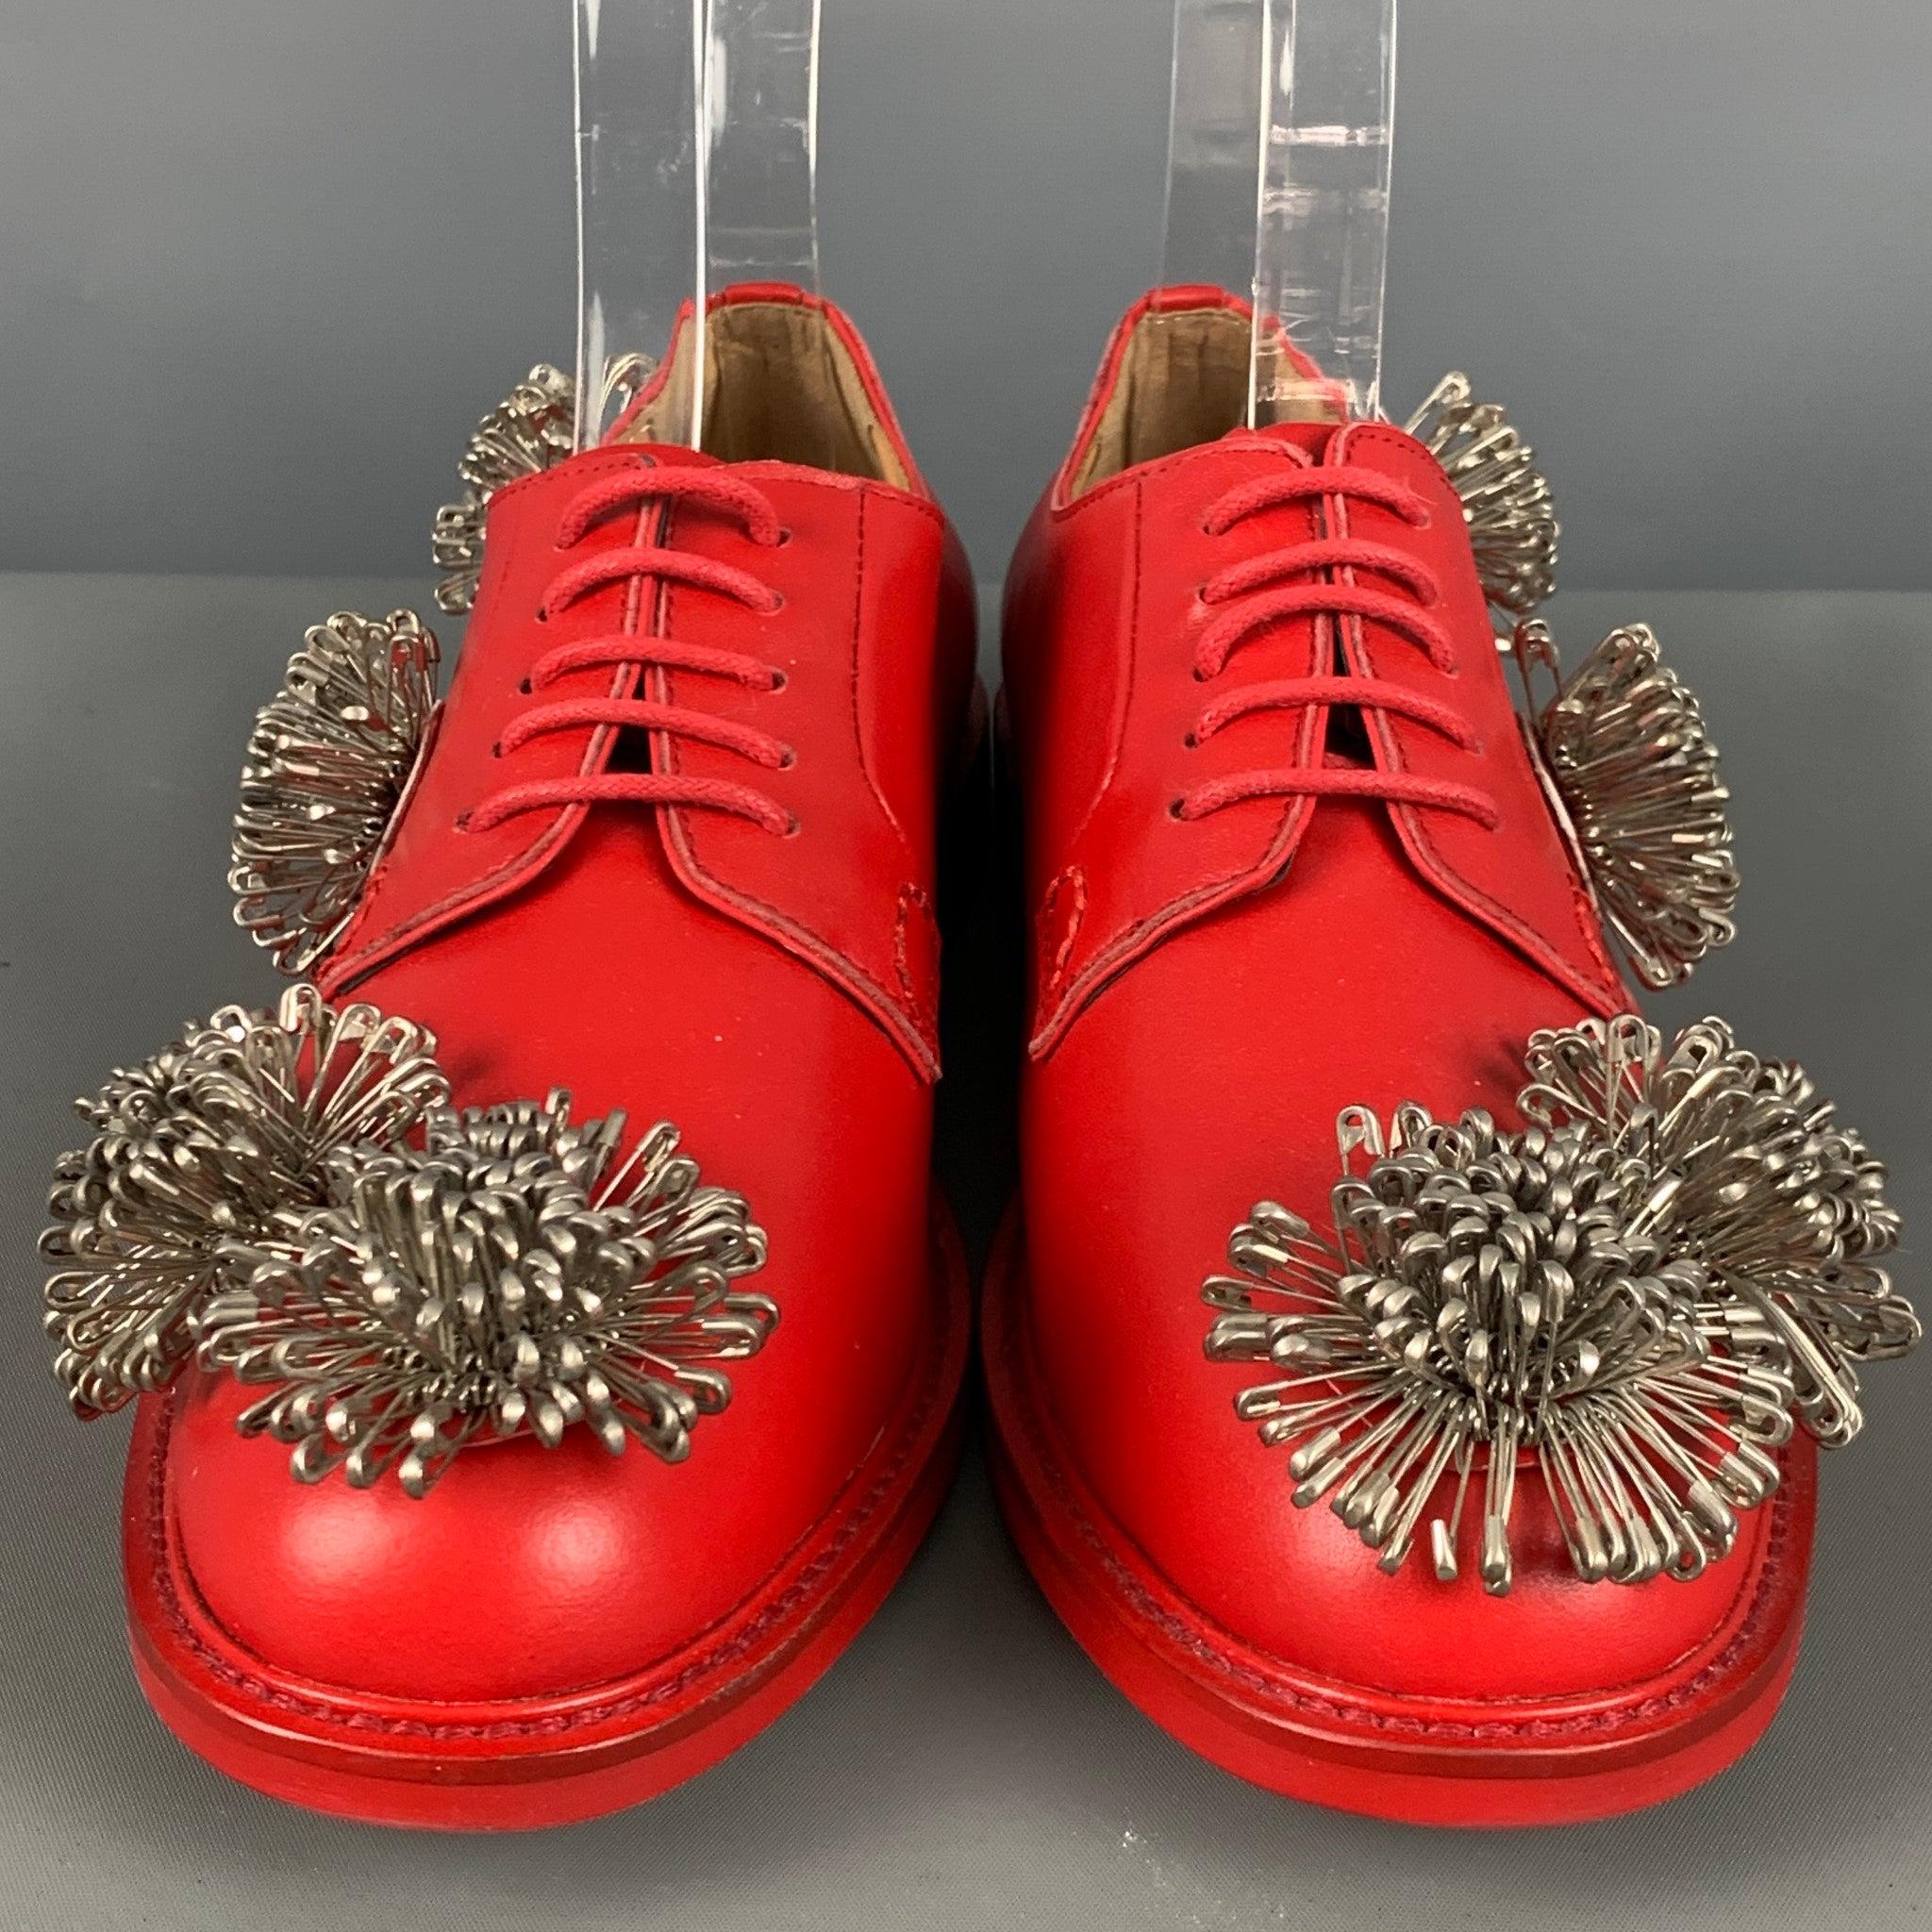 Women's NOIR KEI NINOMIYA Size 6 Red Leather Applique Lace Up Laces For Sale